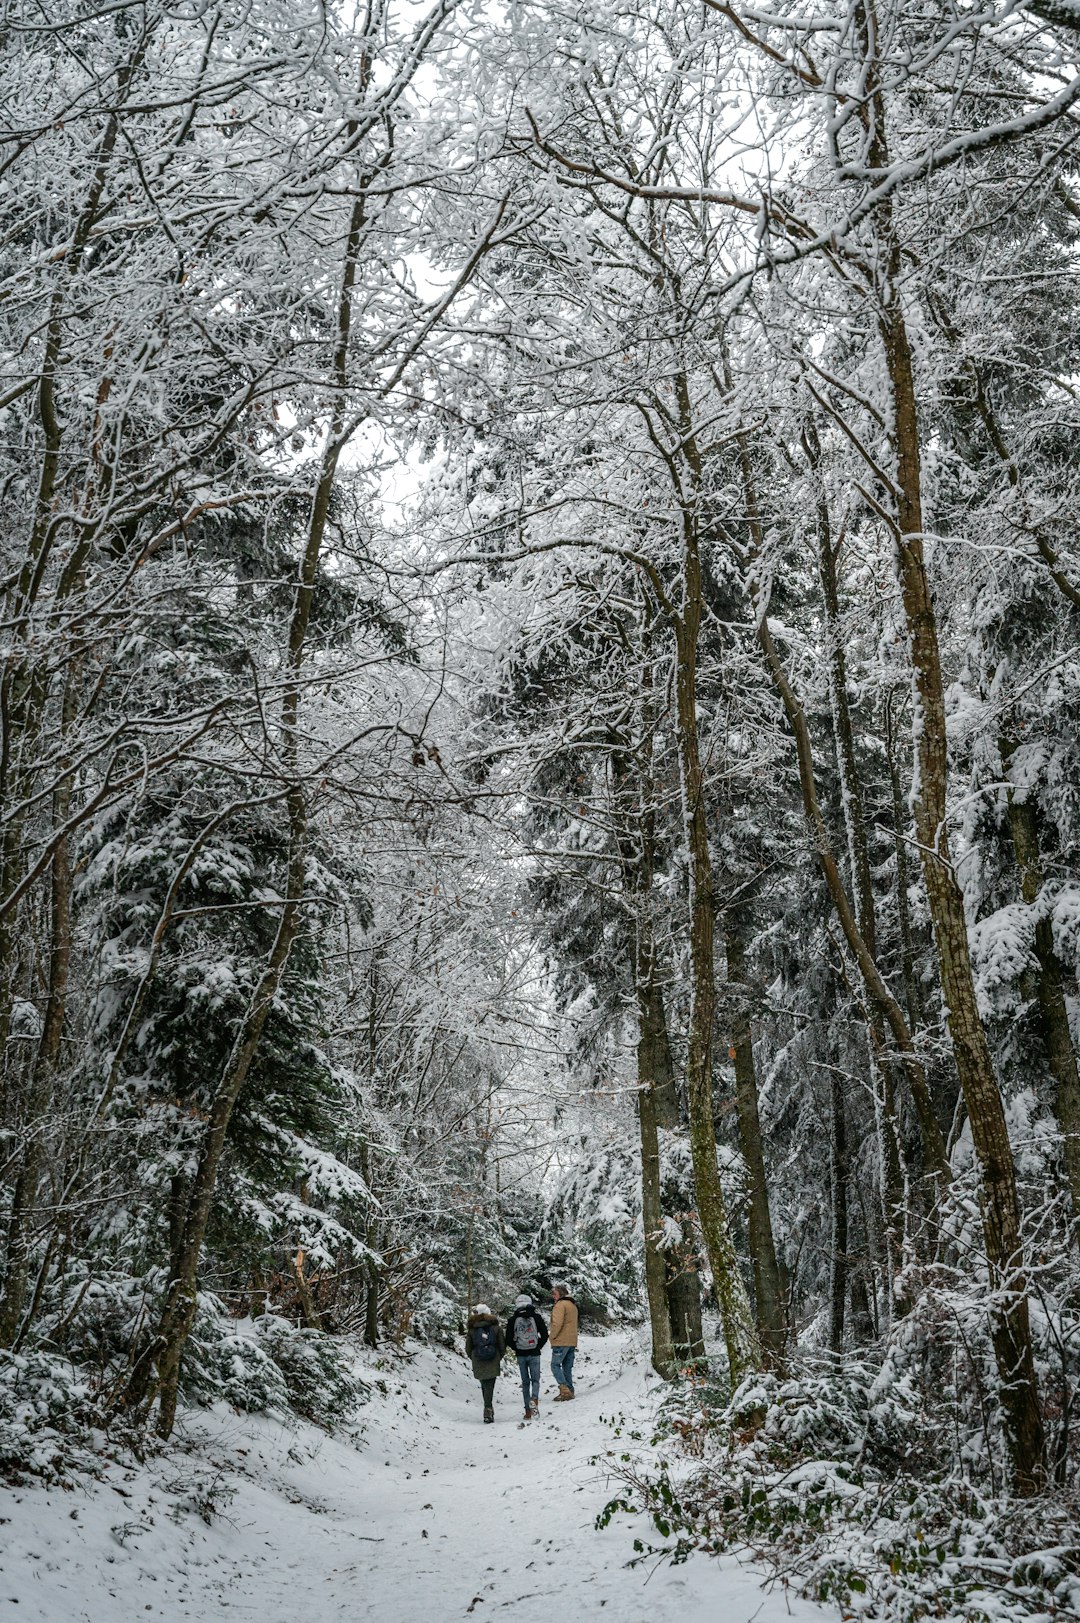 person in black jacket standing on snow covered ground surrounded by bare trees during daytime